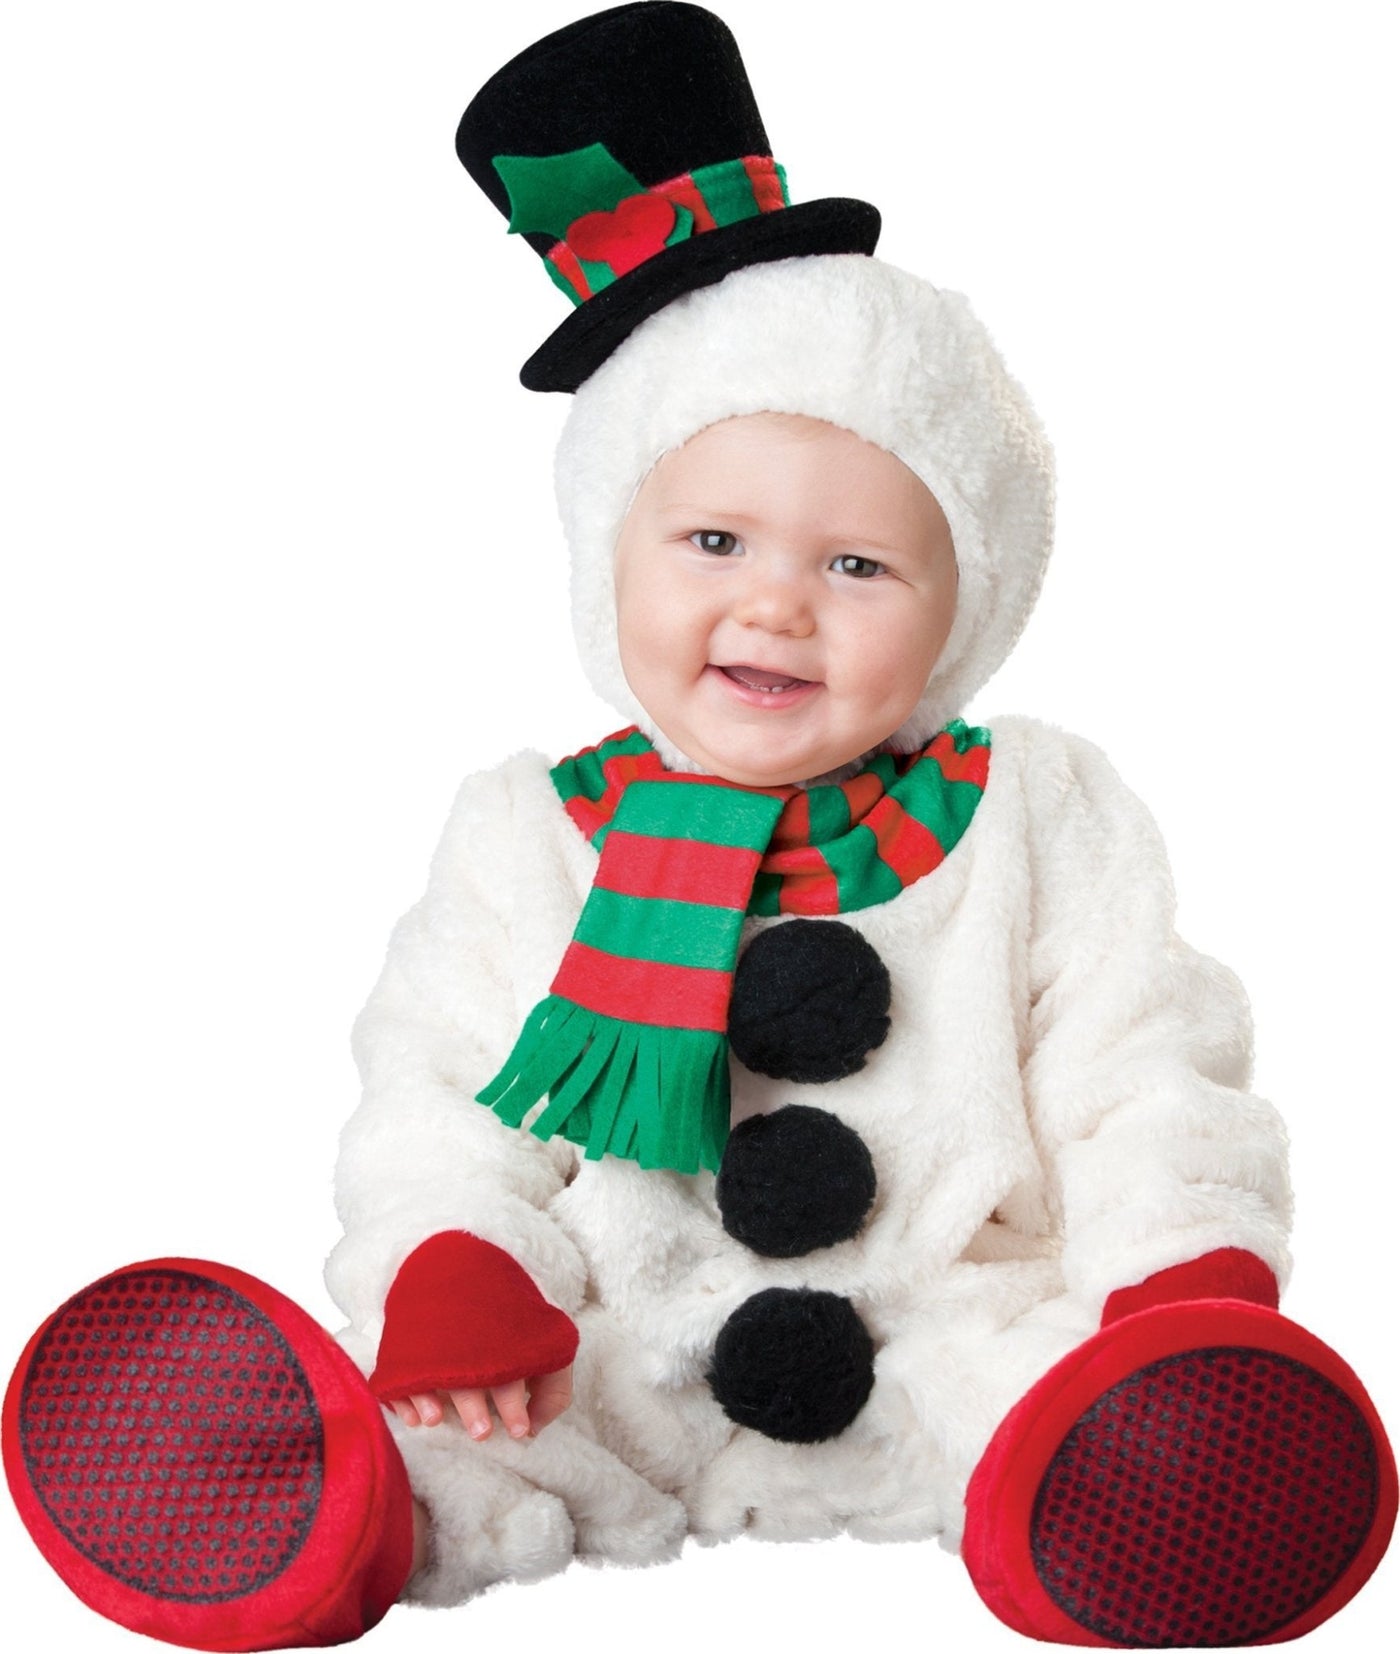 Silly Snowman Costume - JJ's Party House